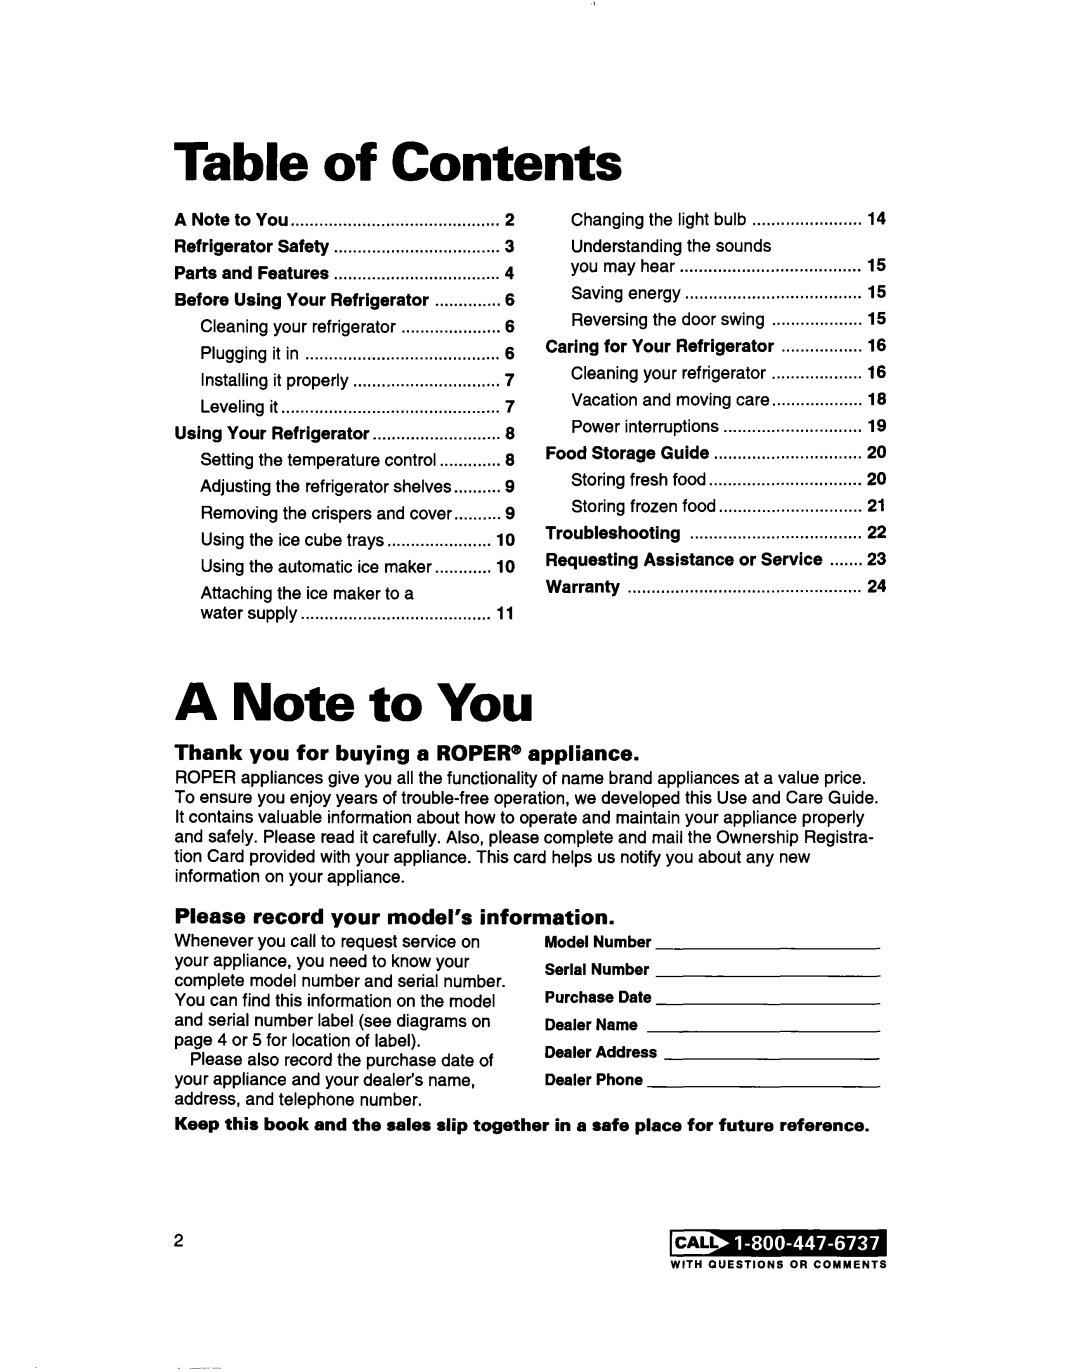 Whirlpool 2183013 warranty Table of Contents, A Note to You, Thank you for buying a ROPER@ appliance 